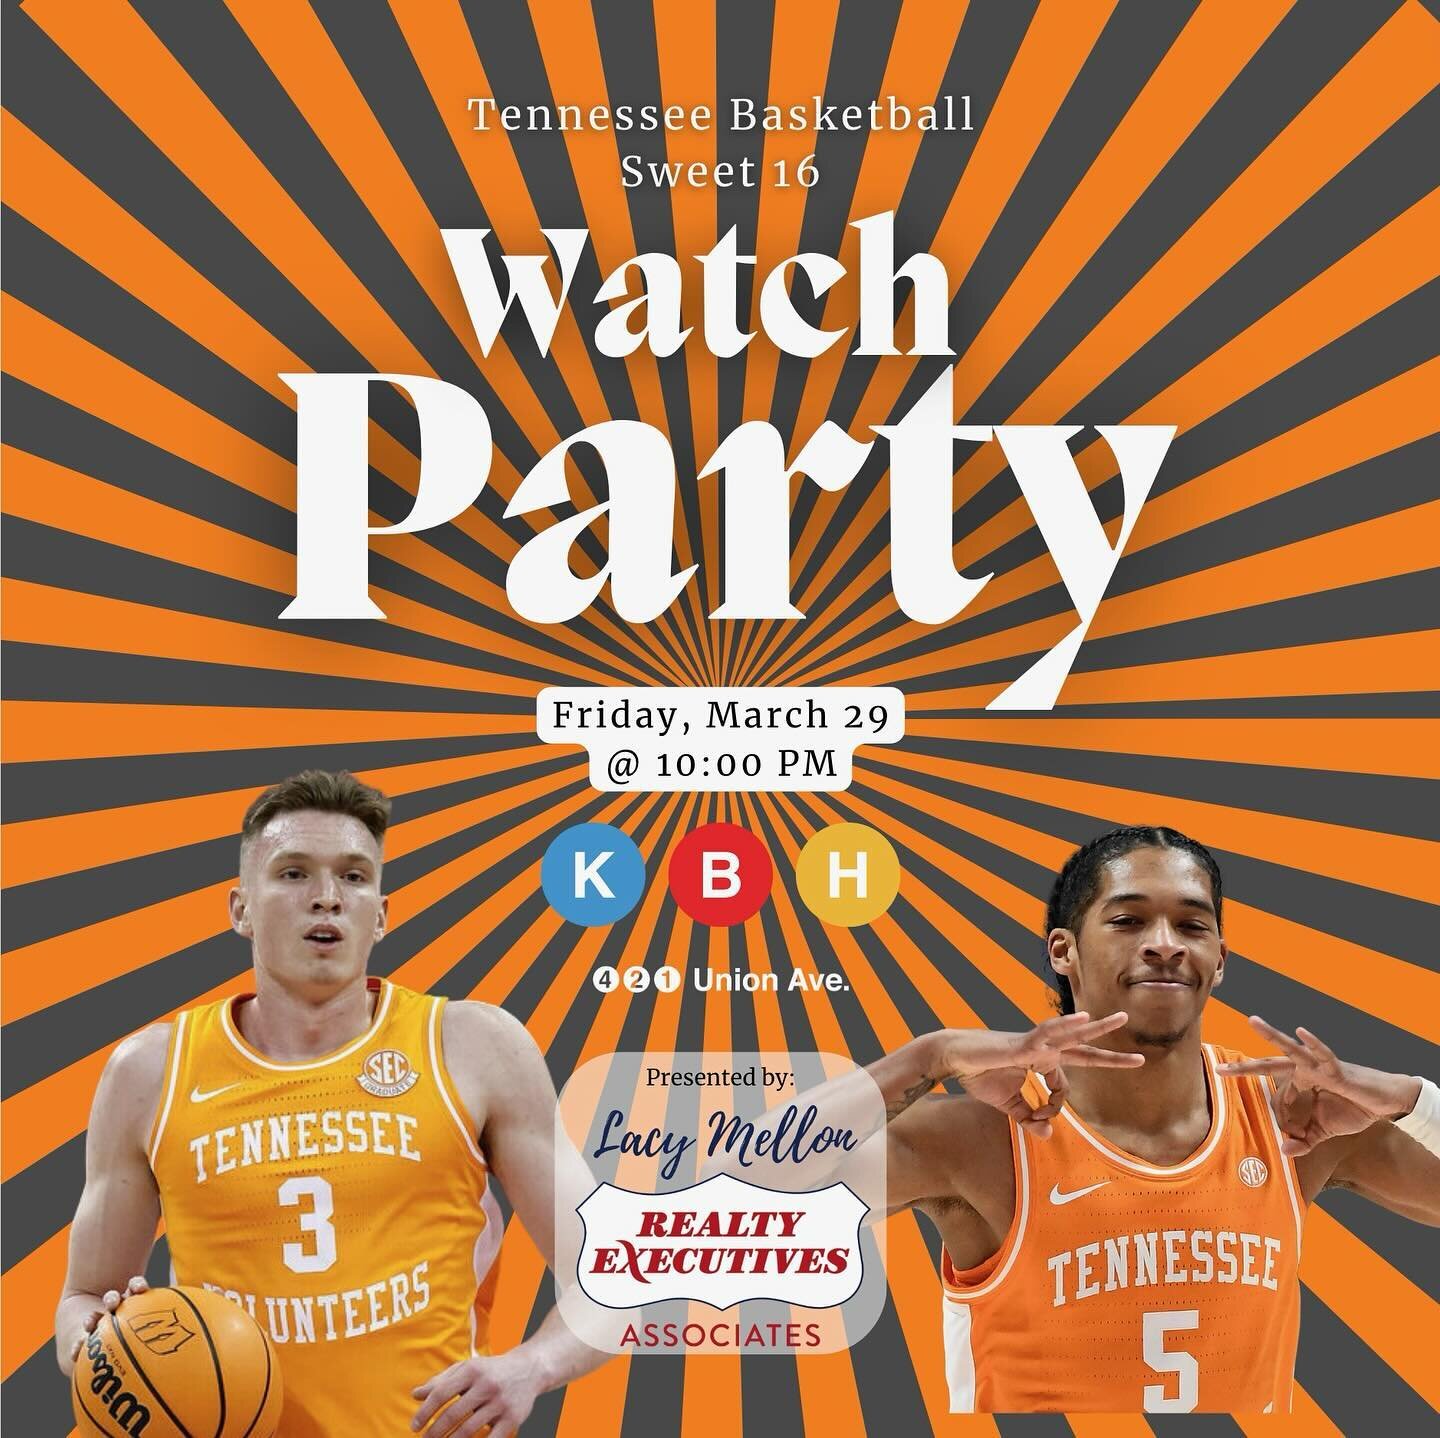 🏀 We are SO excited to watch the Vols play this Friday! So excited, that we are staying open for the game! 

The kitchen will close at halftime, and last call us at the buzzer. 

See you Friday, and GBO!! 🏀🍊

#craftbeerbar #downtownknox #localbeer